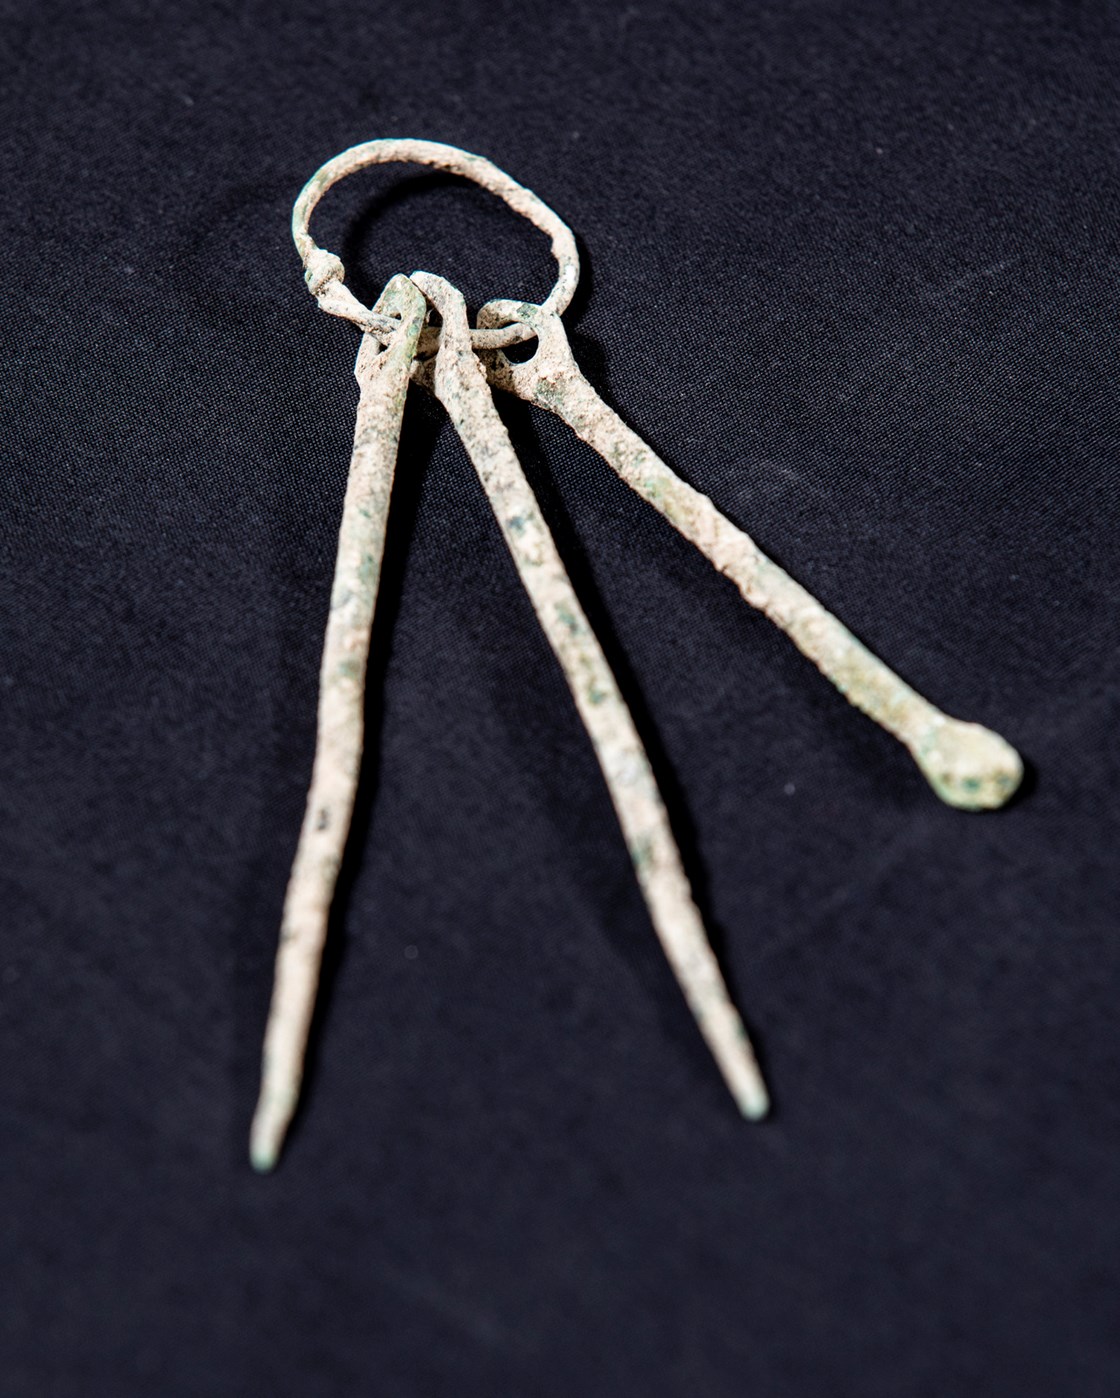 Copper alloy toiletry set uncovered in the excavation of an Anglo Saxon burial ground in Wendover: A 5th or 6th century copper alloy toiletry set, with ear wax cleaning spoon, found in an Anglo Saxon burial of a likely female between 18-24 years old.

Tags: Anglo Saxon, Archaeology, Grave goods, History, Heritage, Wendover, Buckinghamshire